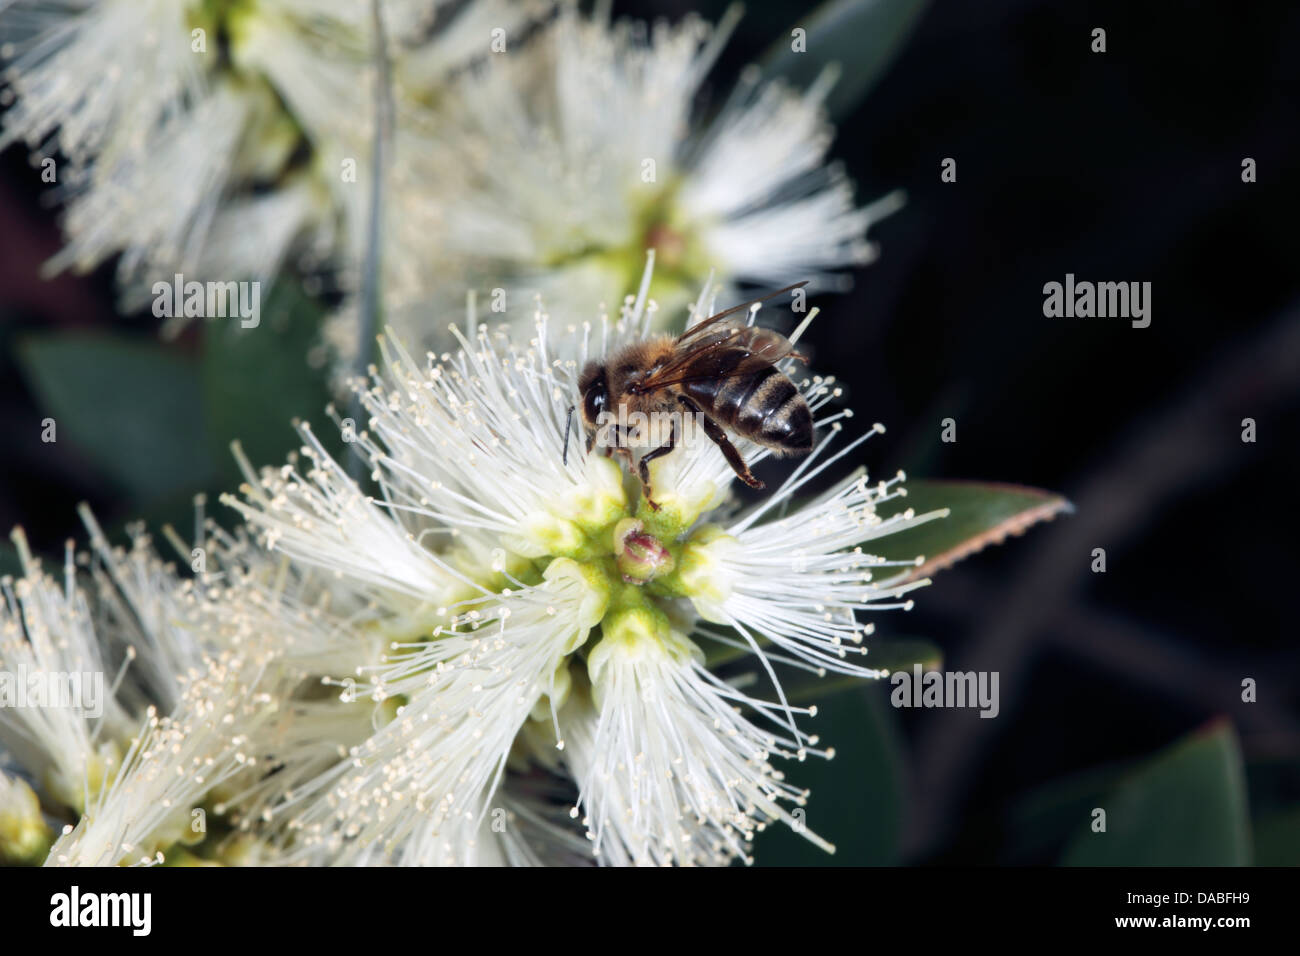 Broad-leaved Paperbark flower with Honey-bee [Apis mellifera] collecting pollen- Melaleuca quinquenervia- Family Myrtaceae Stock Photo